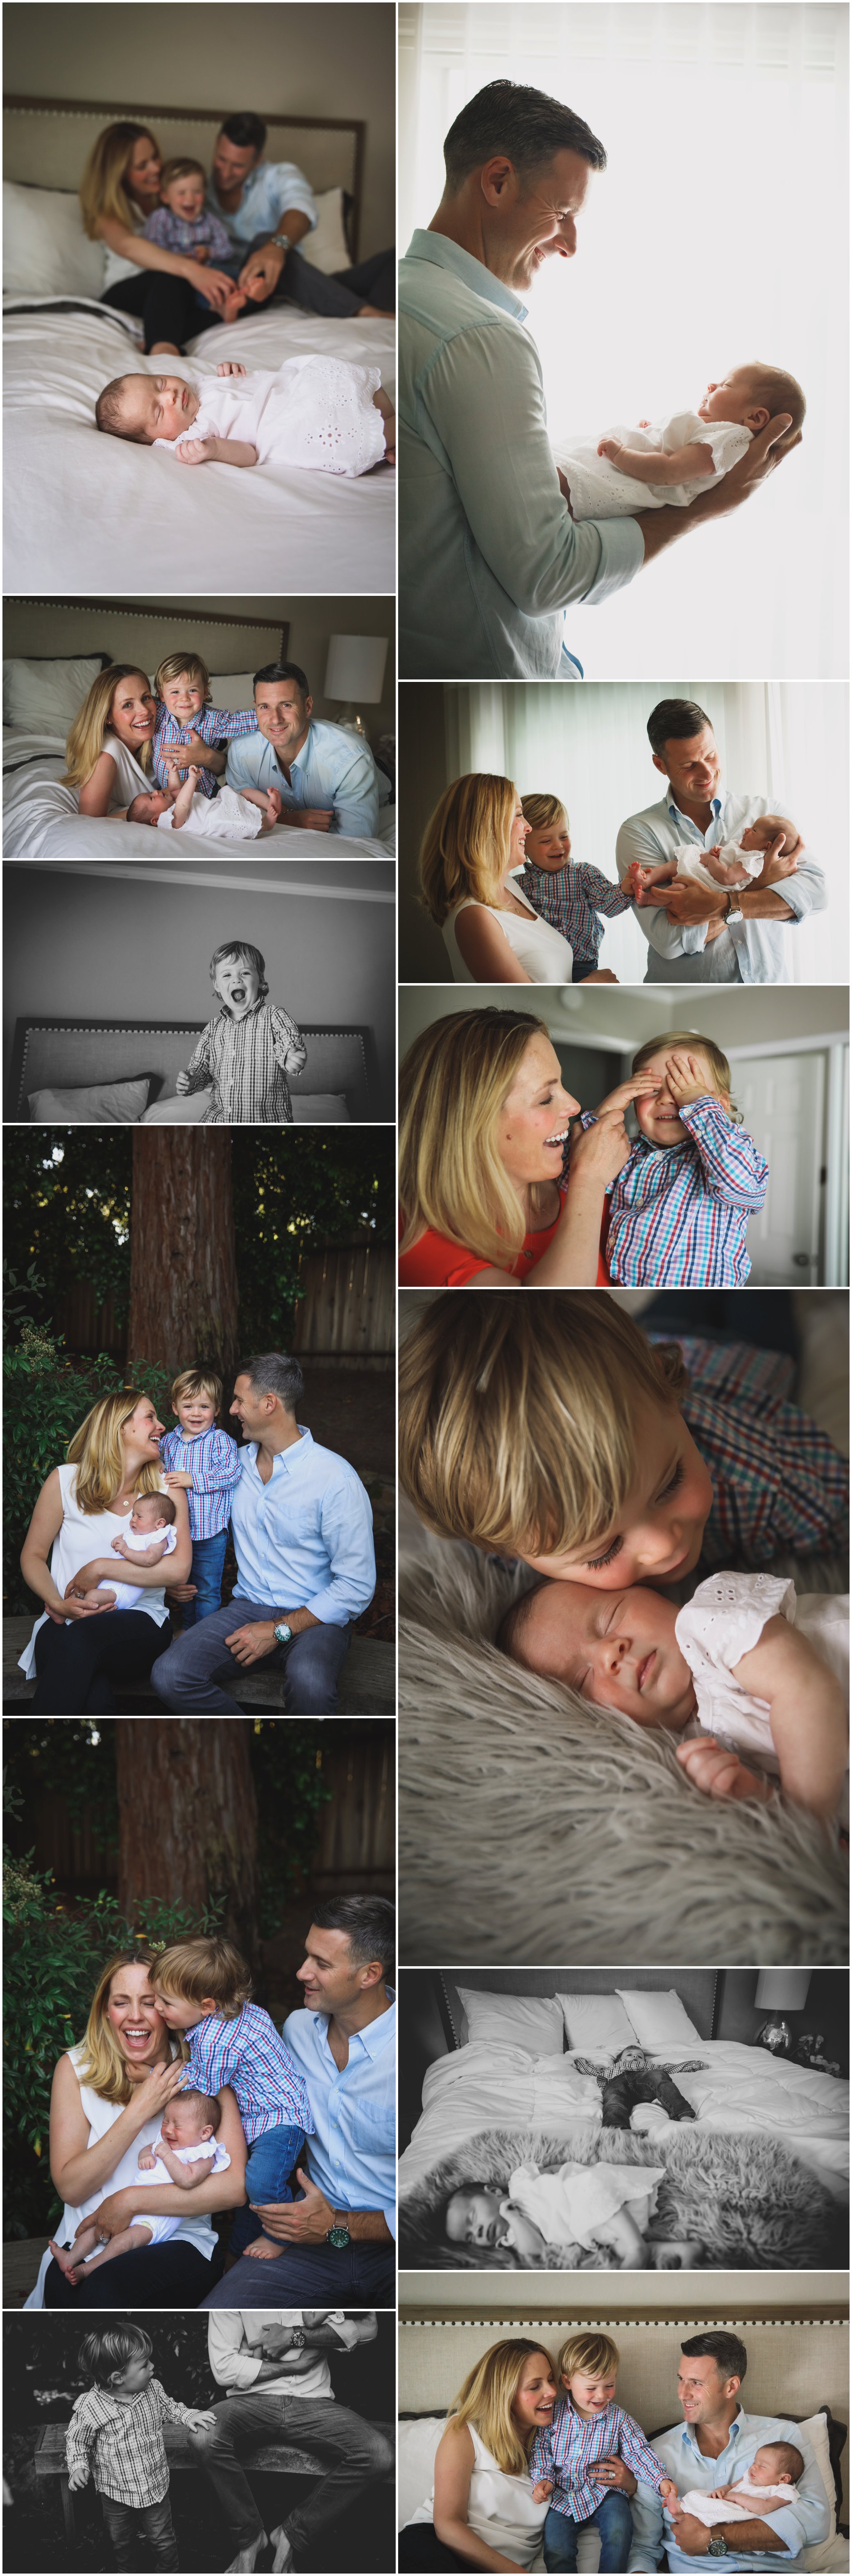 A Lifestyle In-Home Newborn Session, by Katie Rain Photography